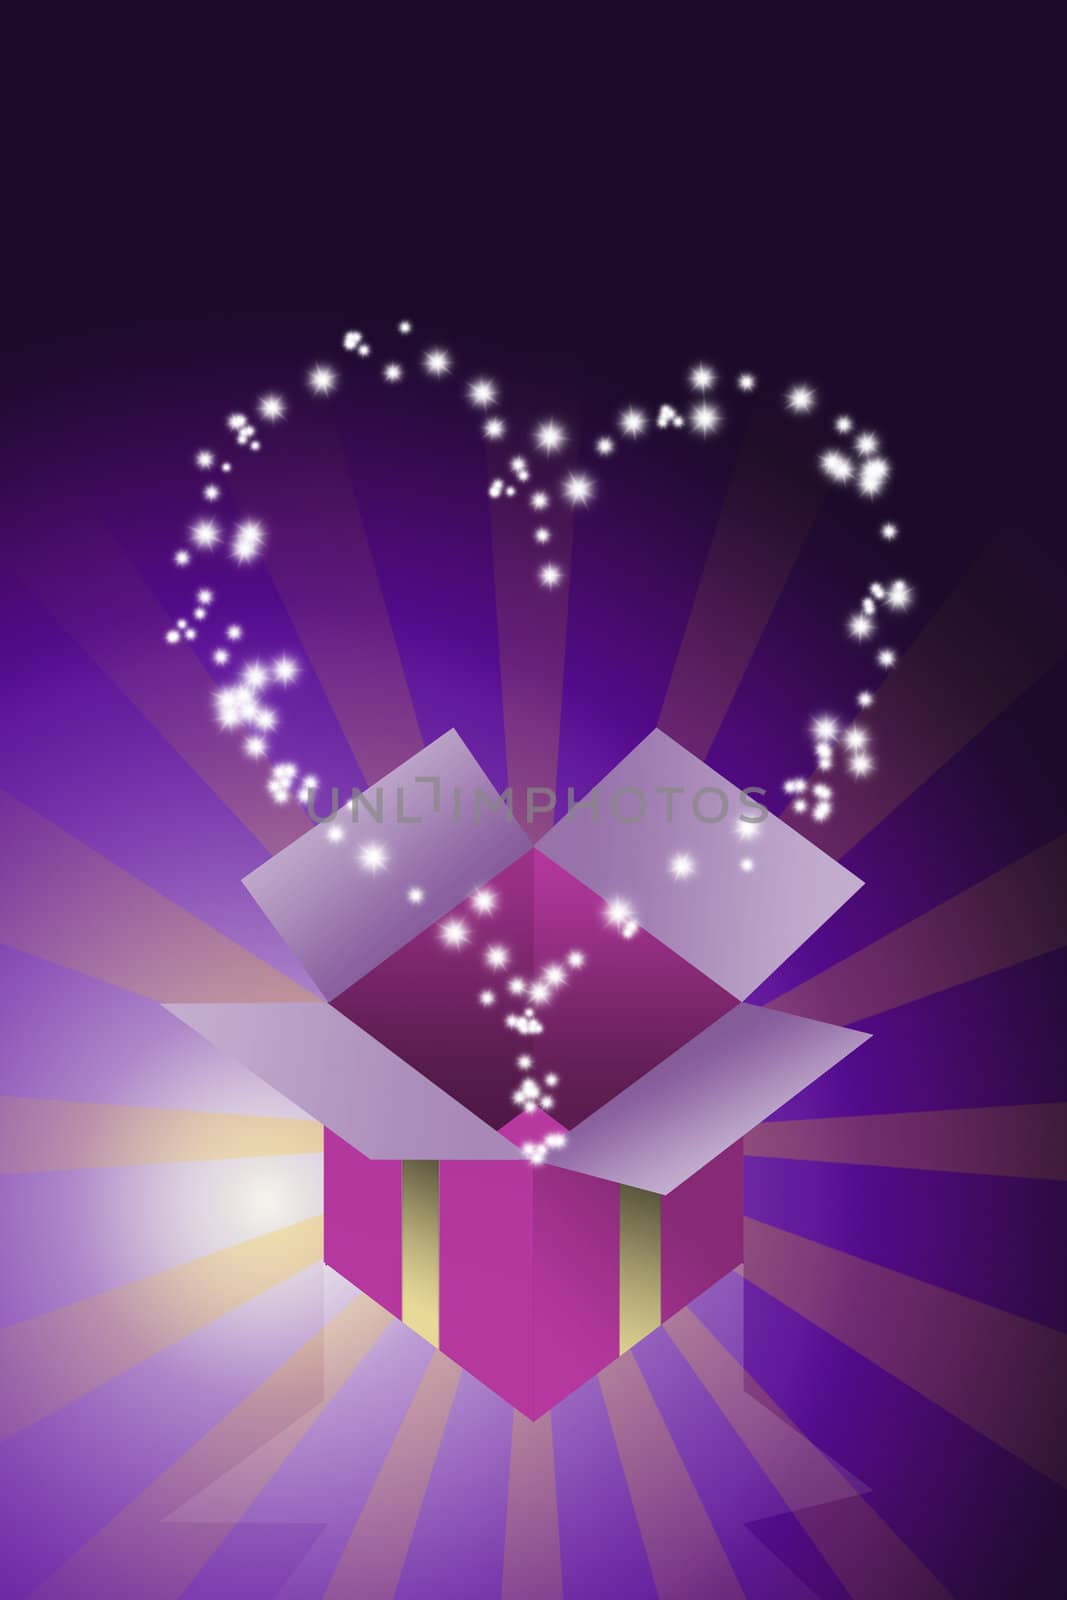 Blessing heart star flying from gift box with purple color background by pixbox77